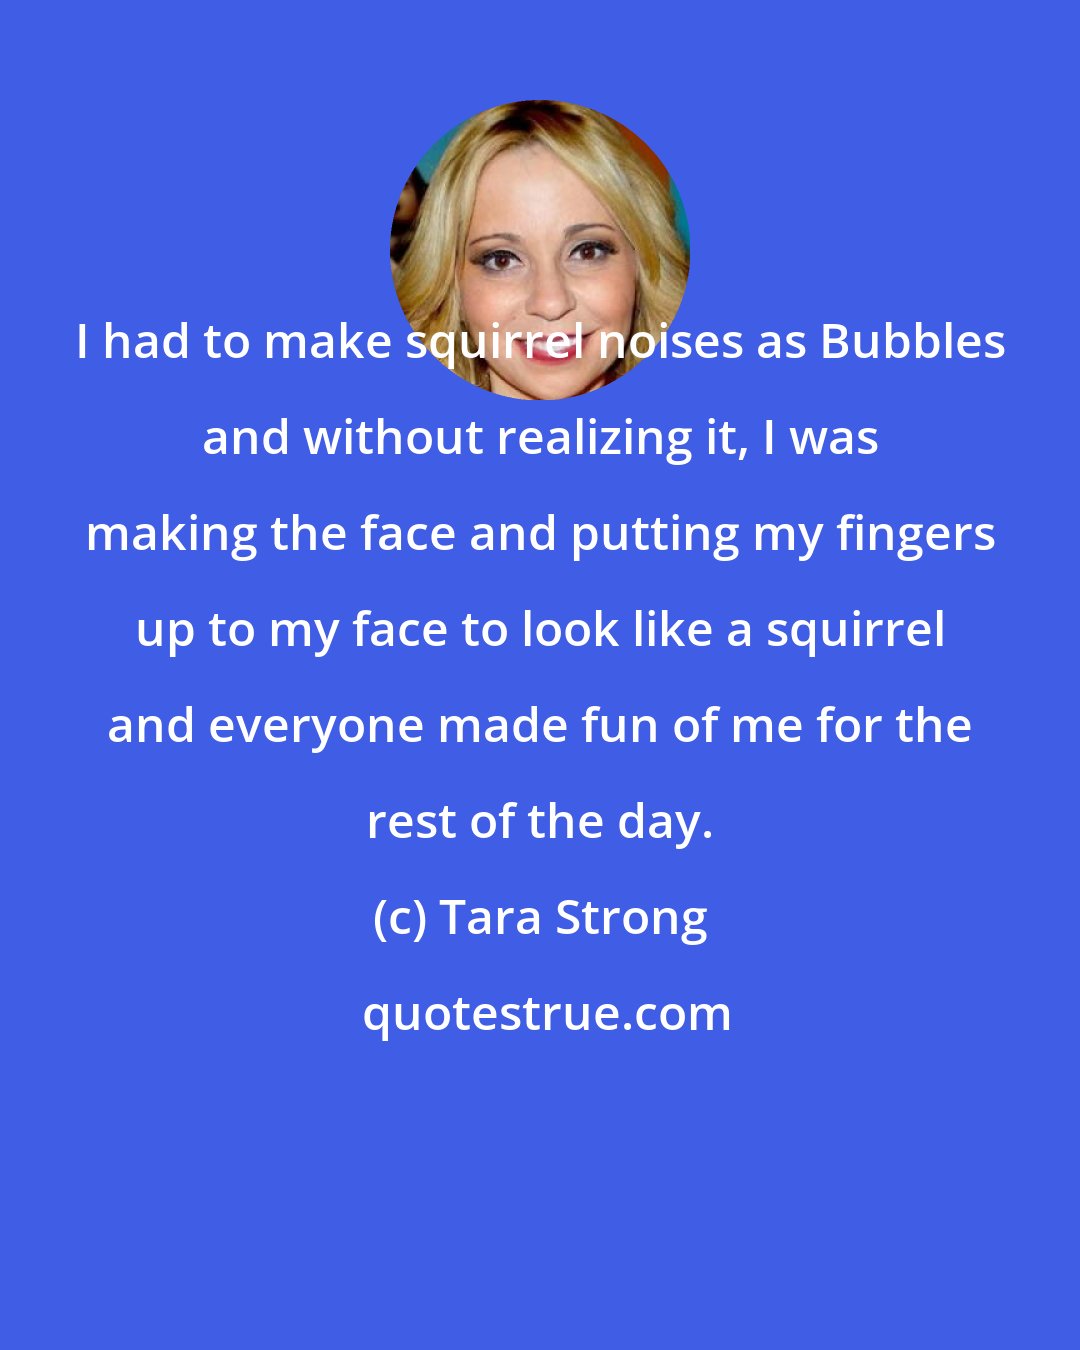 Tara Strong: I had to make squirrel noises as Bubbles and without realizing it, I was making the face and putting my fingers up to my face to look like a squirrel and everyone made fun of me for the rest of the day.